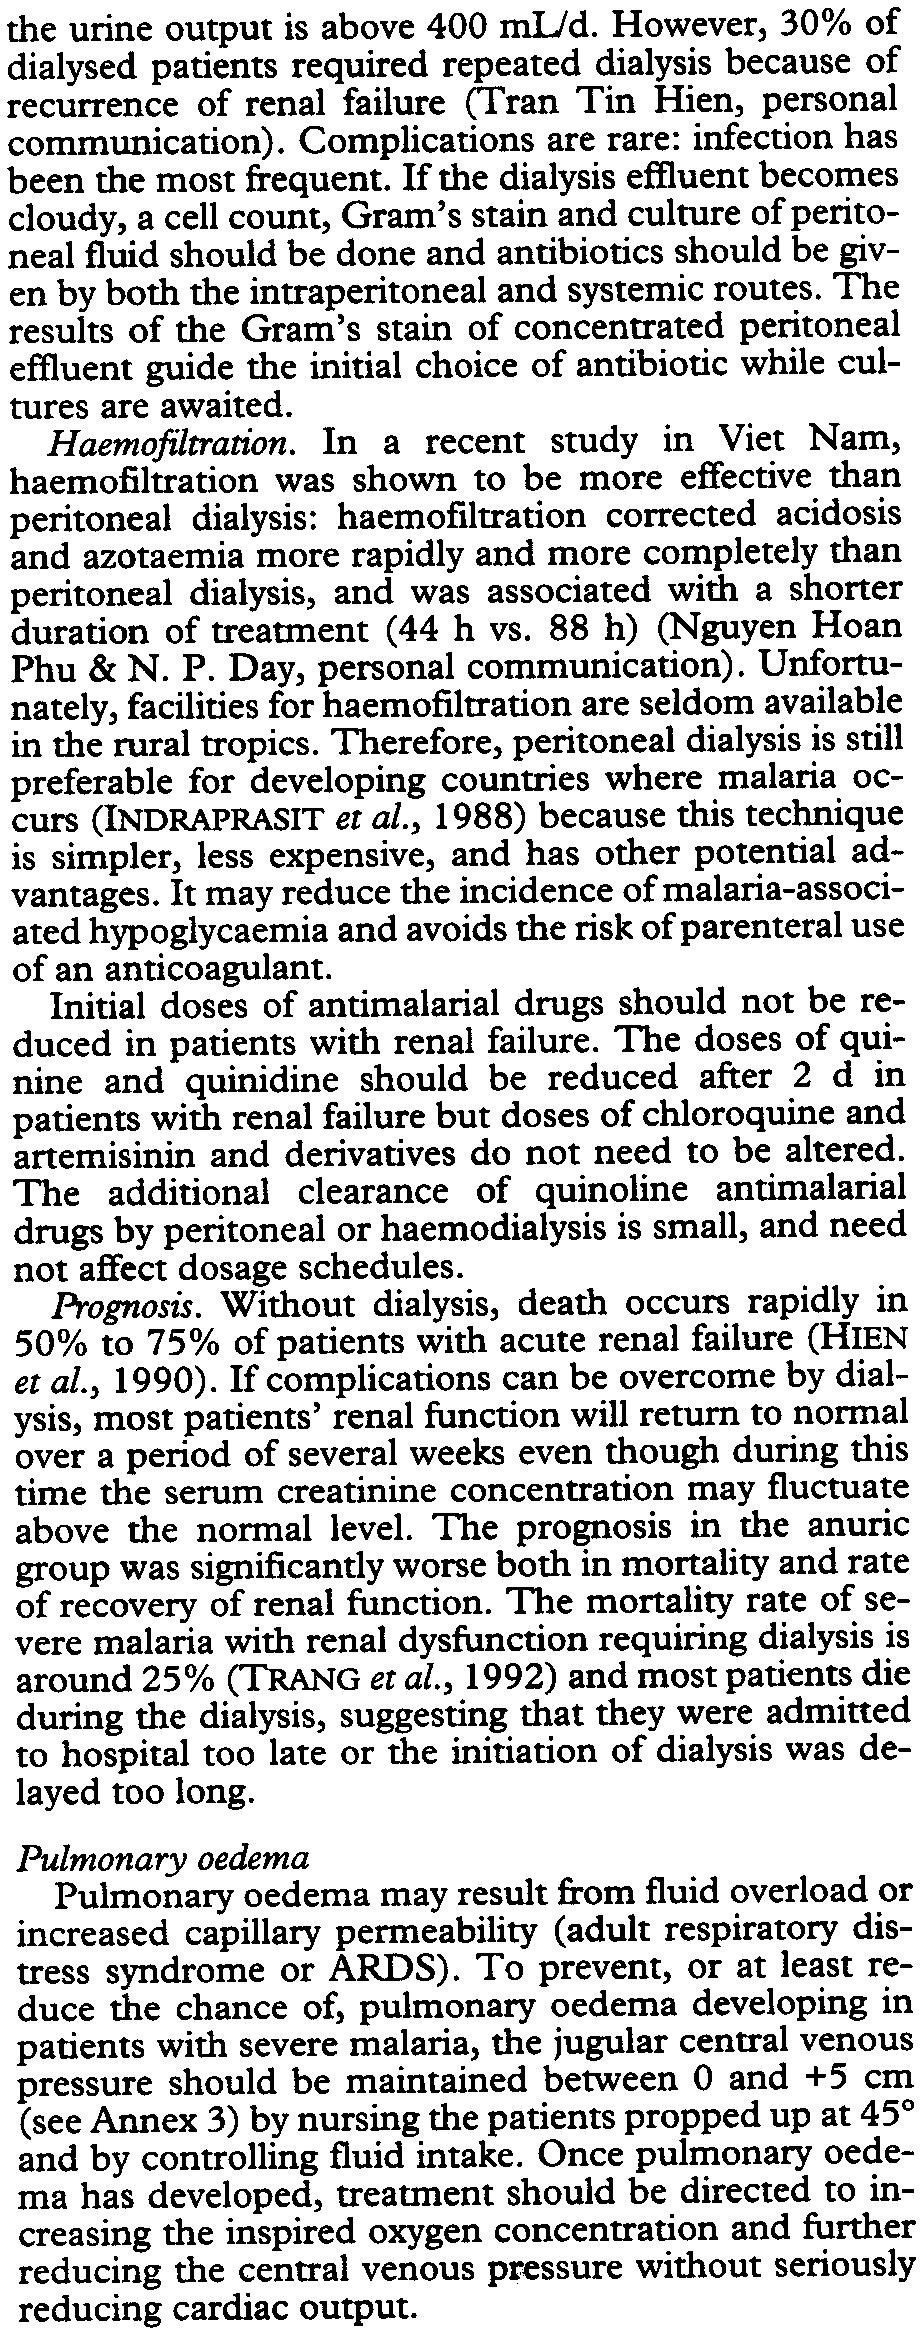 TRANSACTIONS OFTHE ROYAL SOCIETY OFTROPICAL MEDICINE AND HYGIENE (2000) 94, SUPPLEMENT 51/45 ficacy of furosemide and dopamine in preventing or attenuatg acute renal failure in malaria has not been